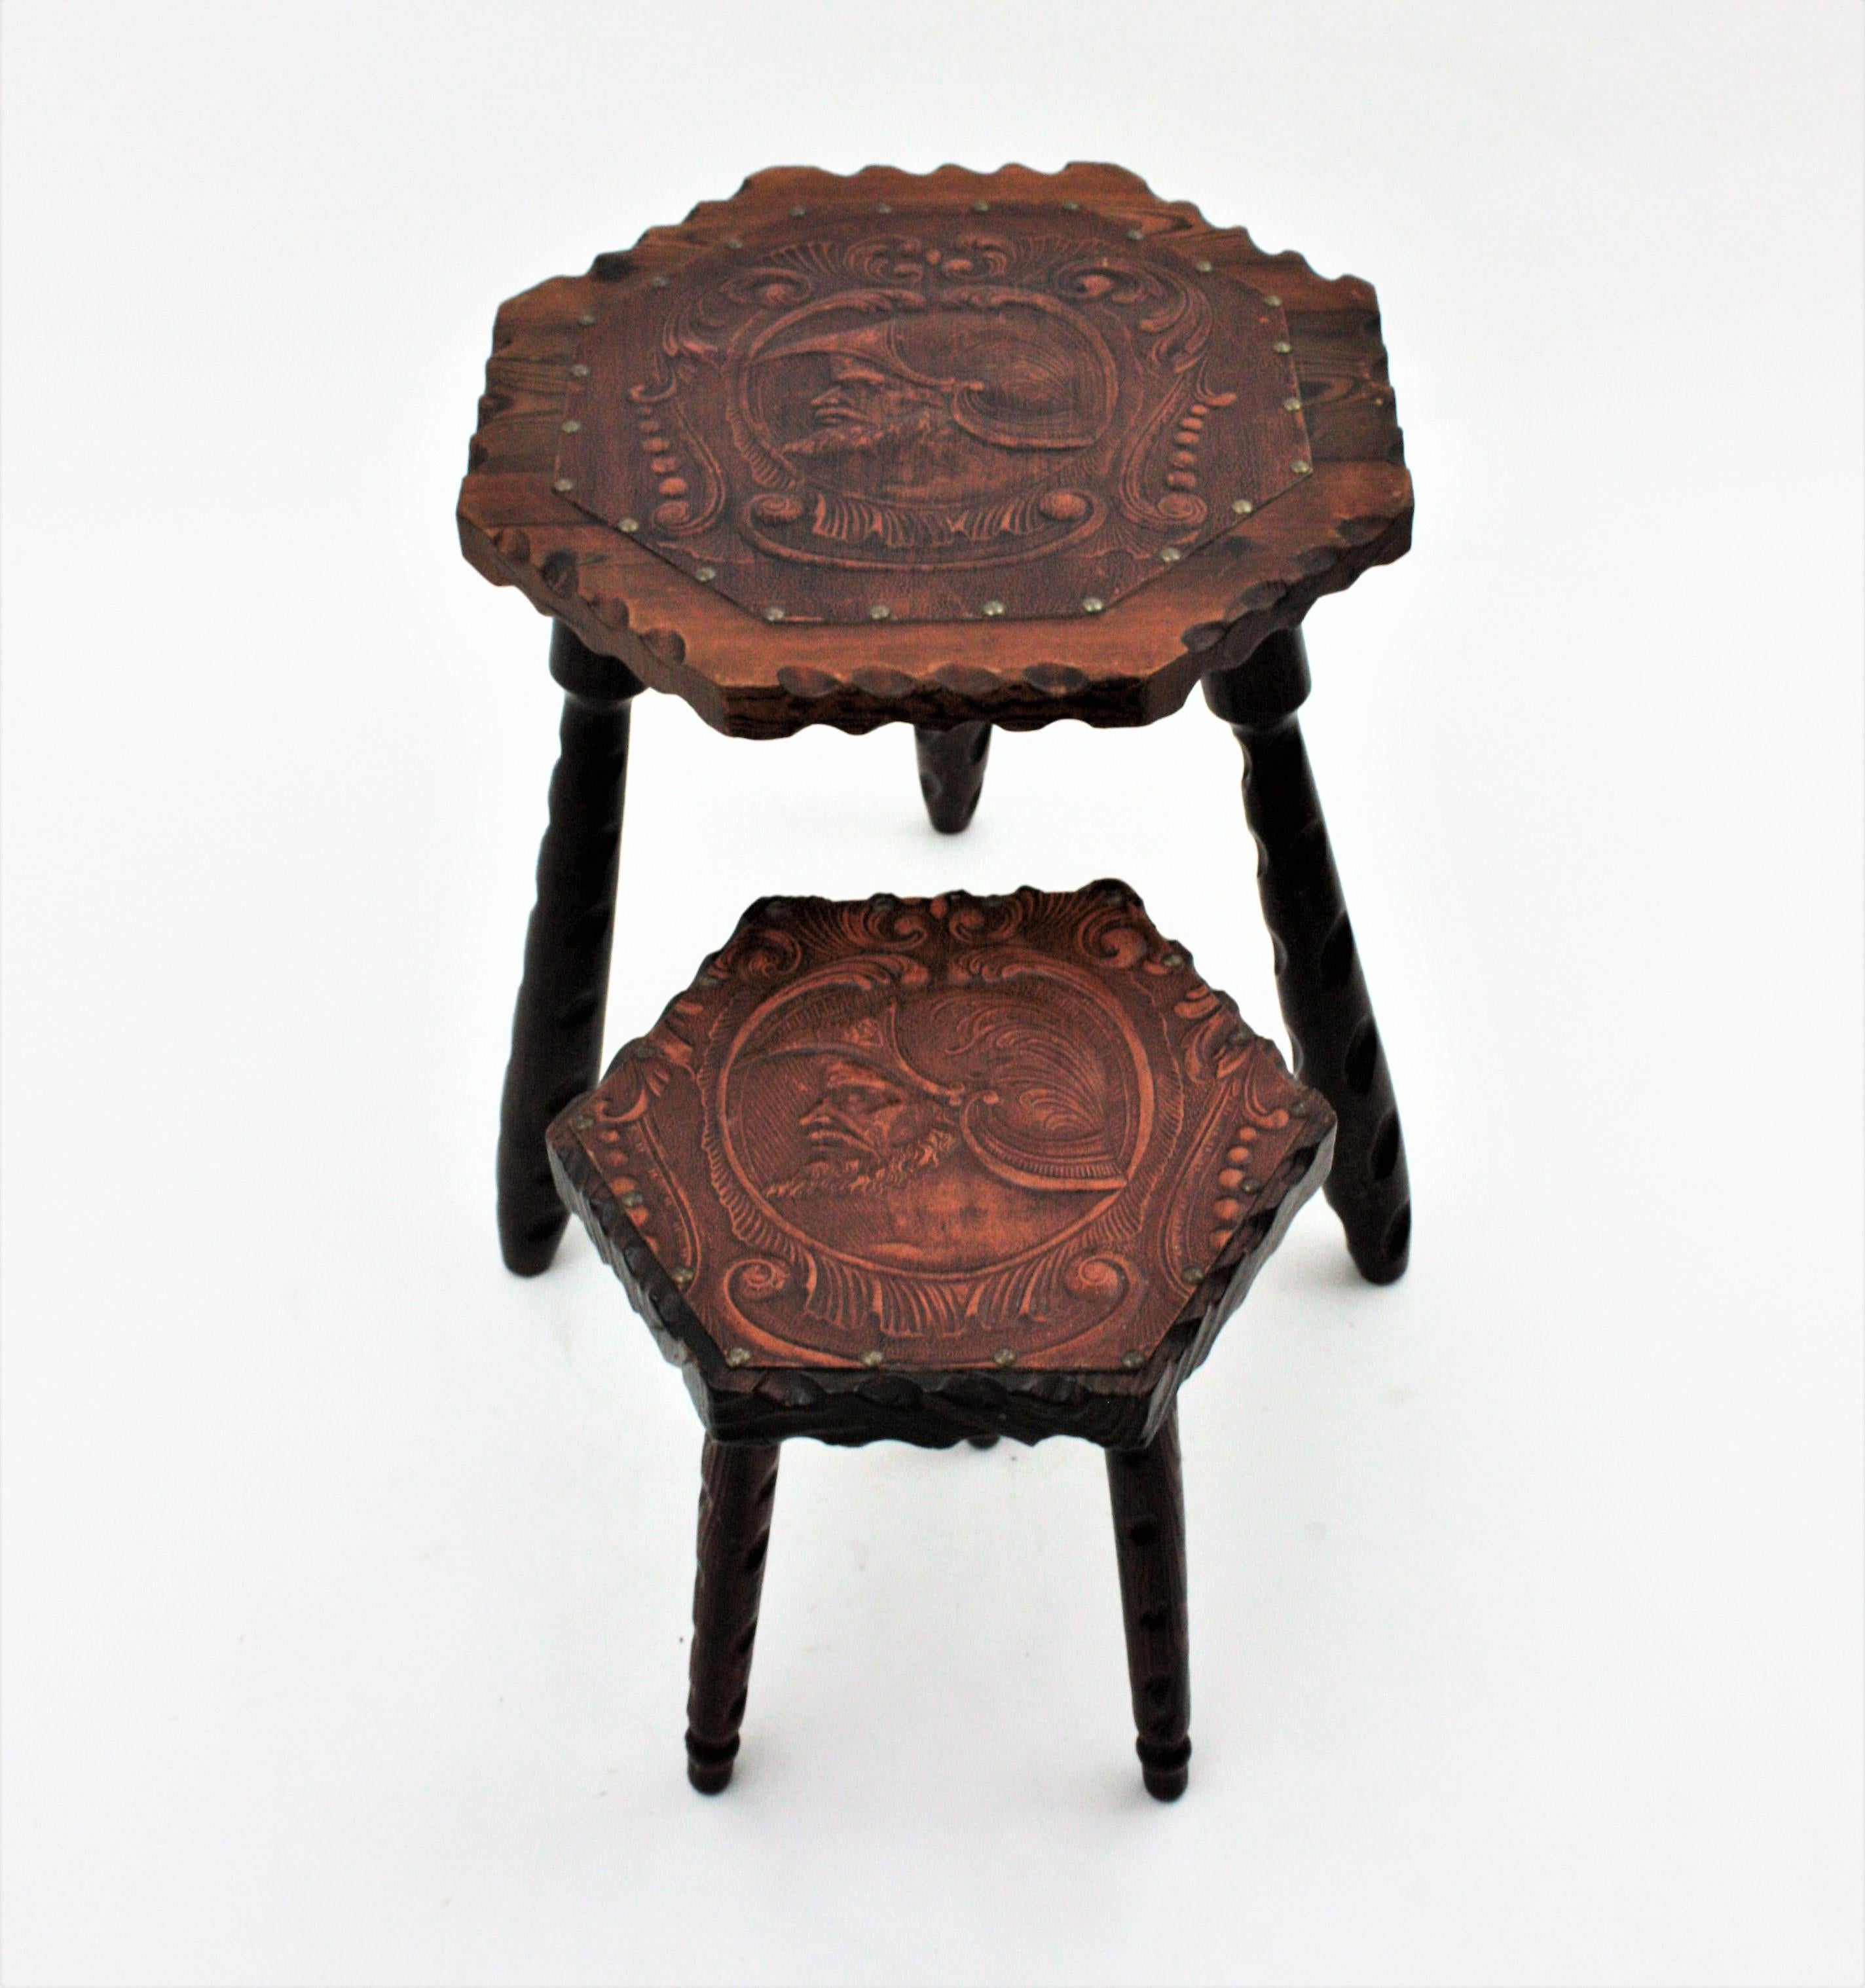 Pair of  Handcarved pine wood gueridon tables with Leather top and tripod base. Spain, 1940s.
The tabletop in hexagonal shape have scalloped details.Supported on turned legs with scalloped details. Both tops are adorned by a repousse leather